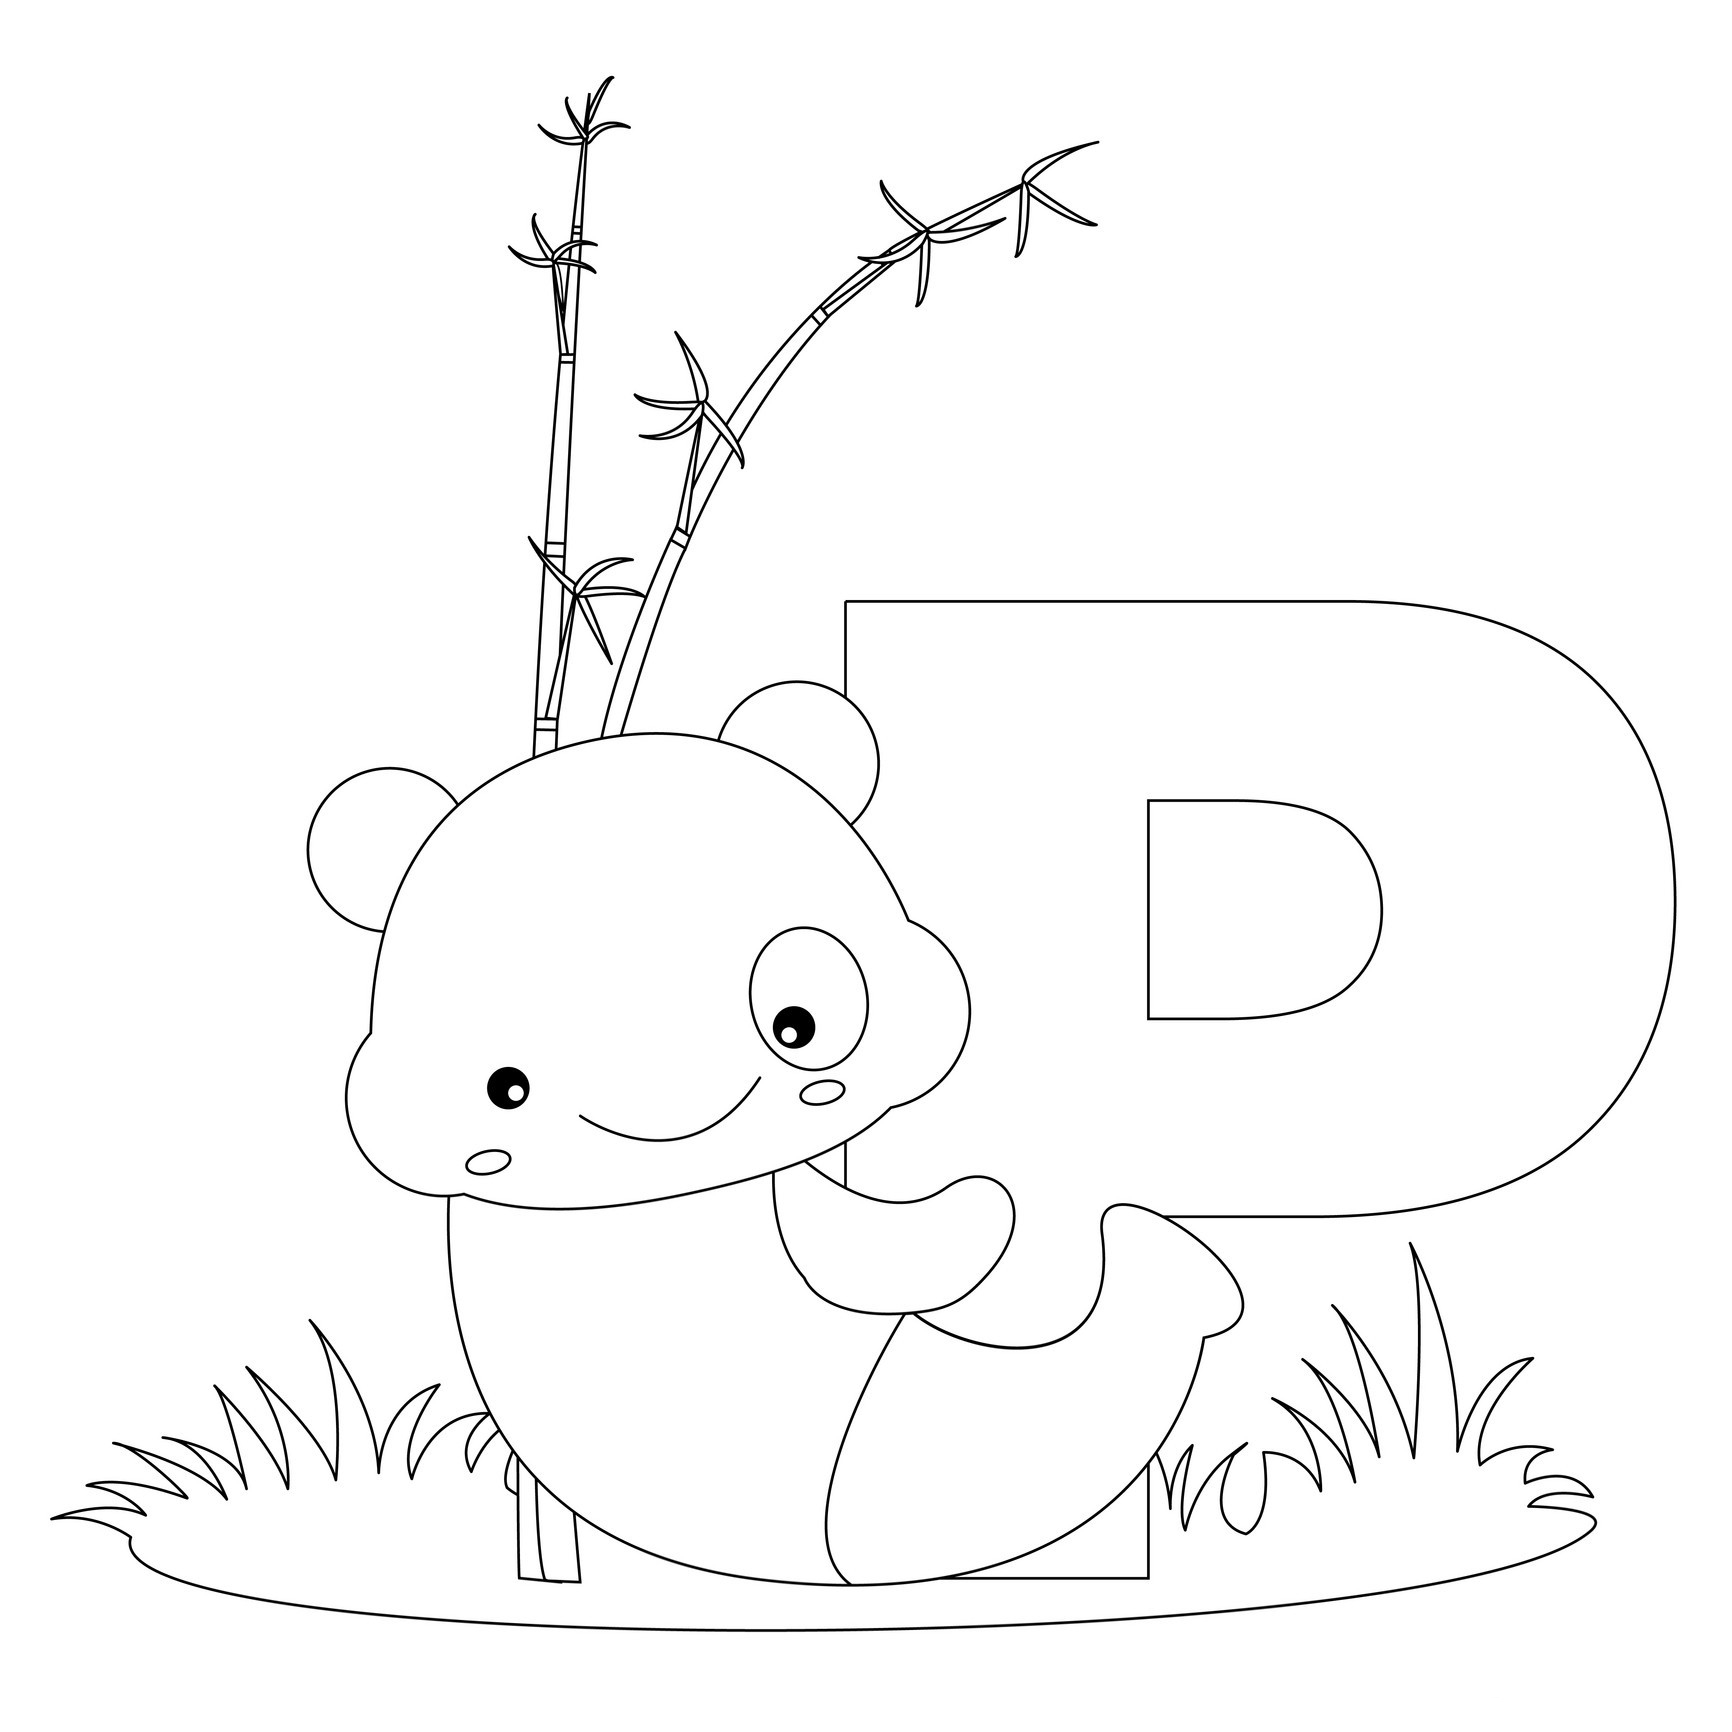 Free Printable Alphabet Coloring Pages for Kids   Best Coloring ...